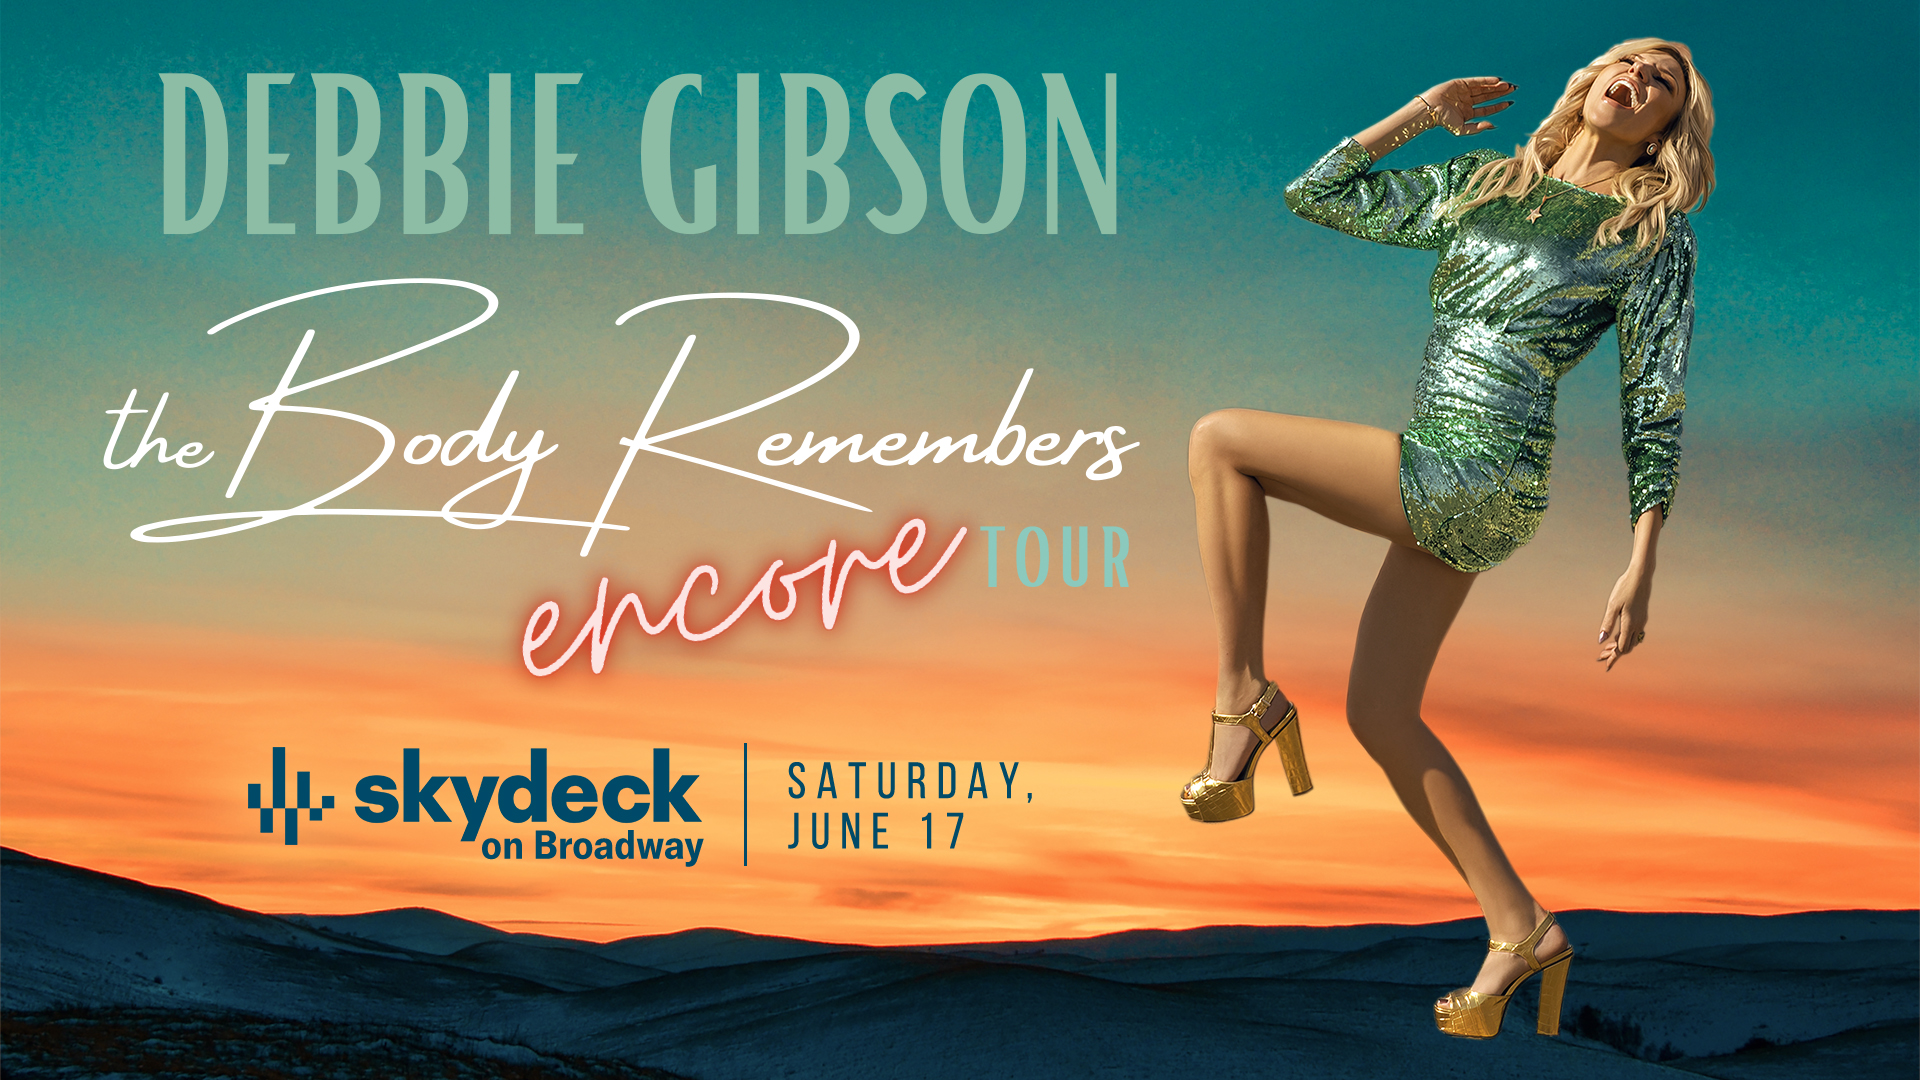 Promo image of Debbie Gibson on Skydeck